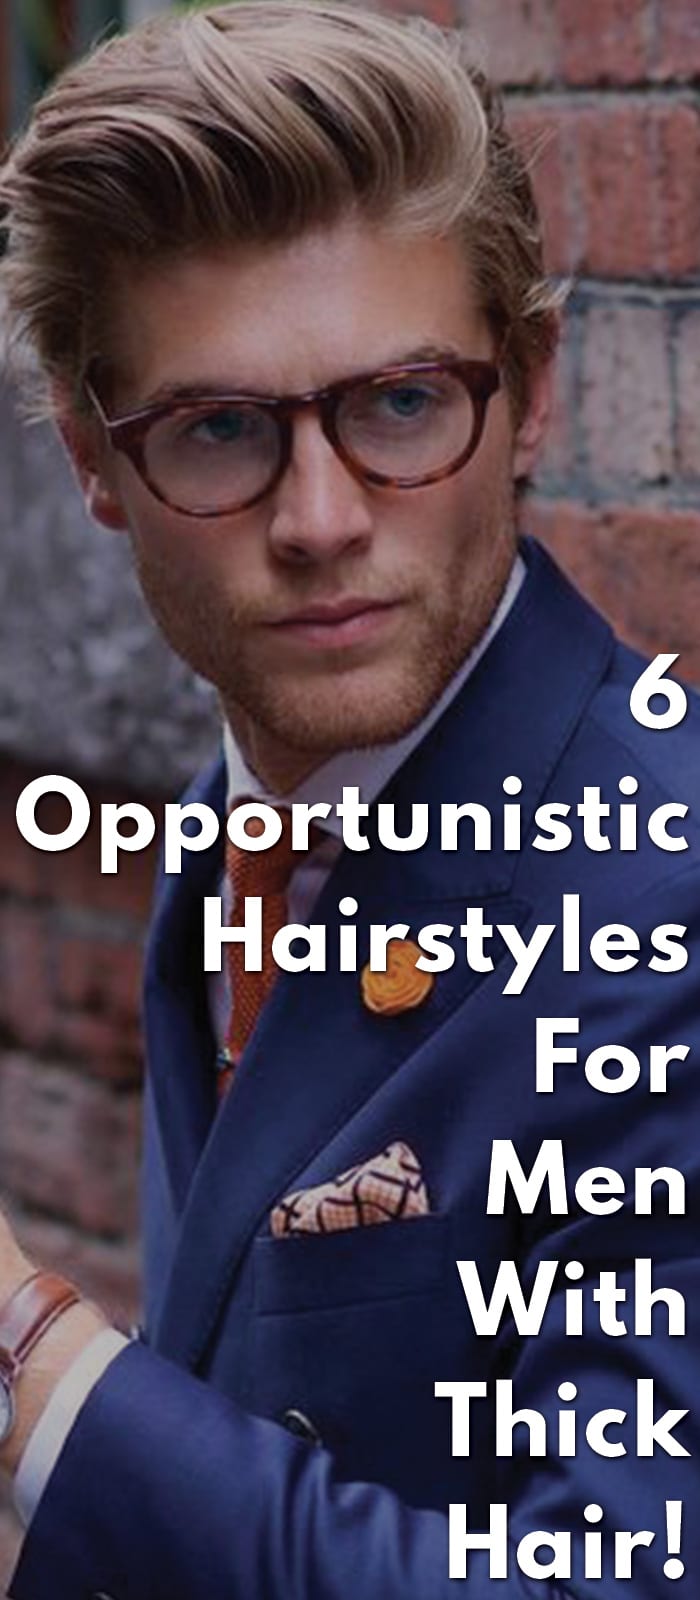 The-6-Opportunistic-Hairstyles-For-Men-With-Thick-Hair!